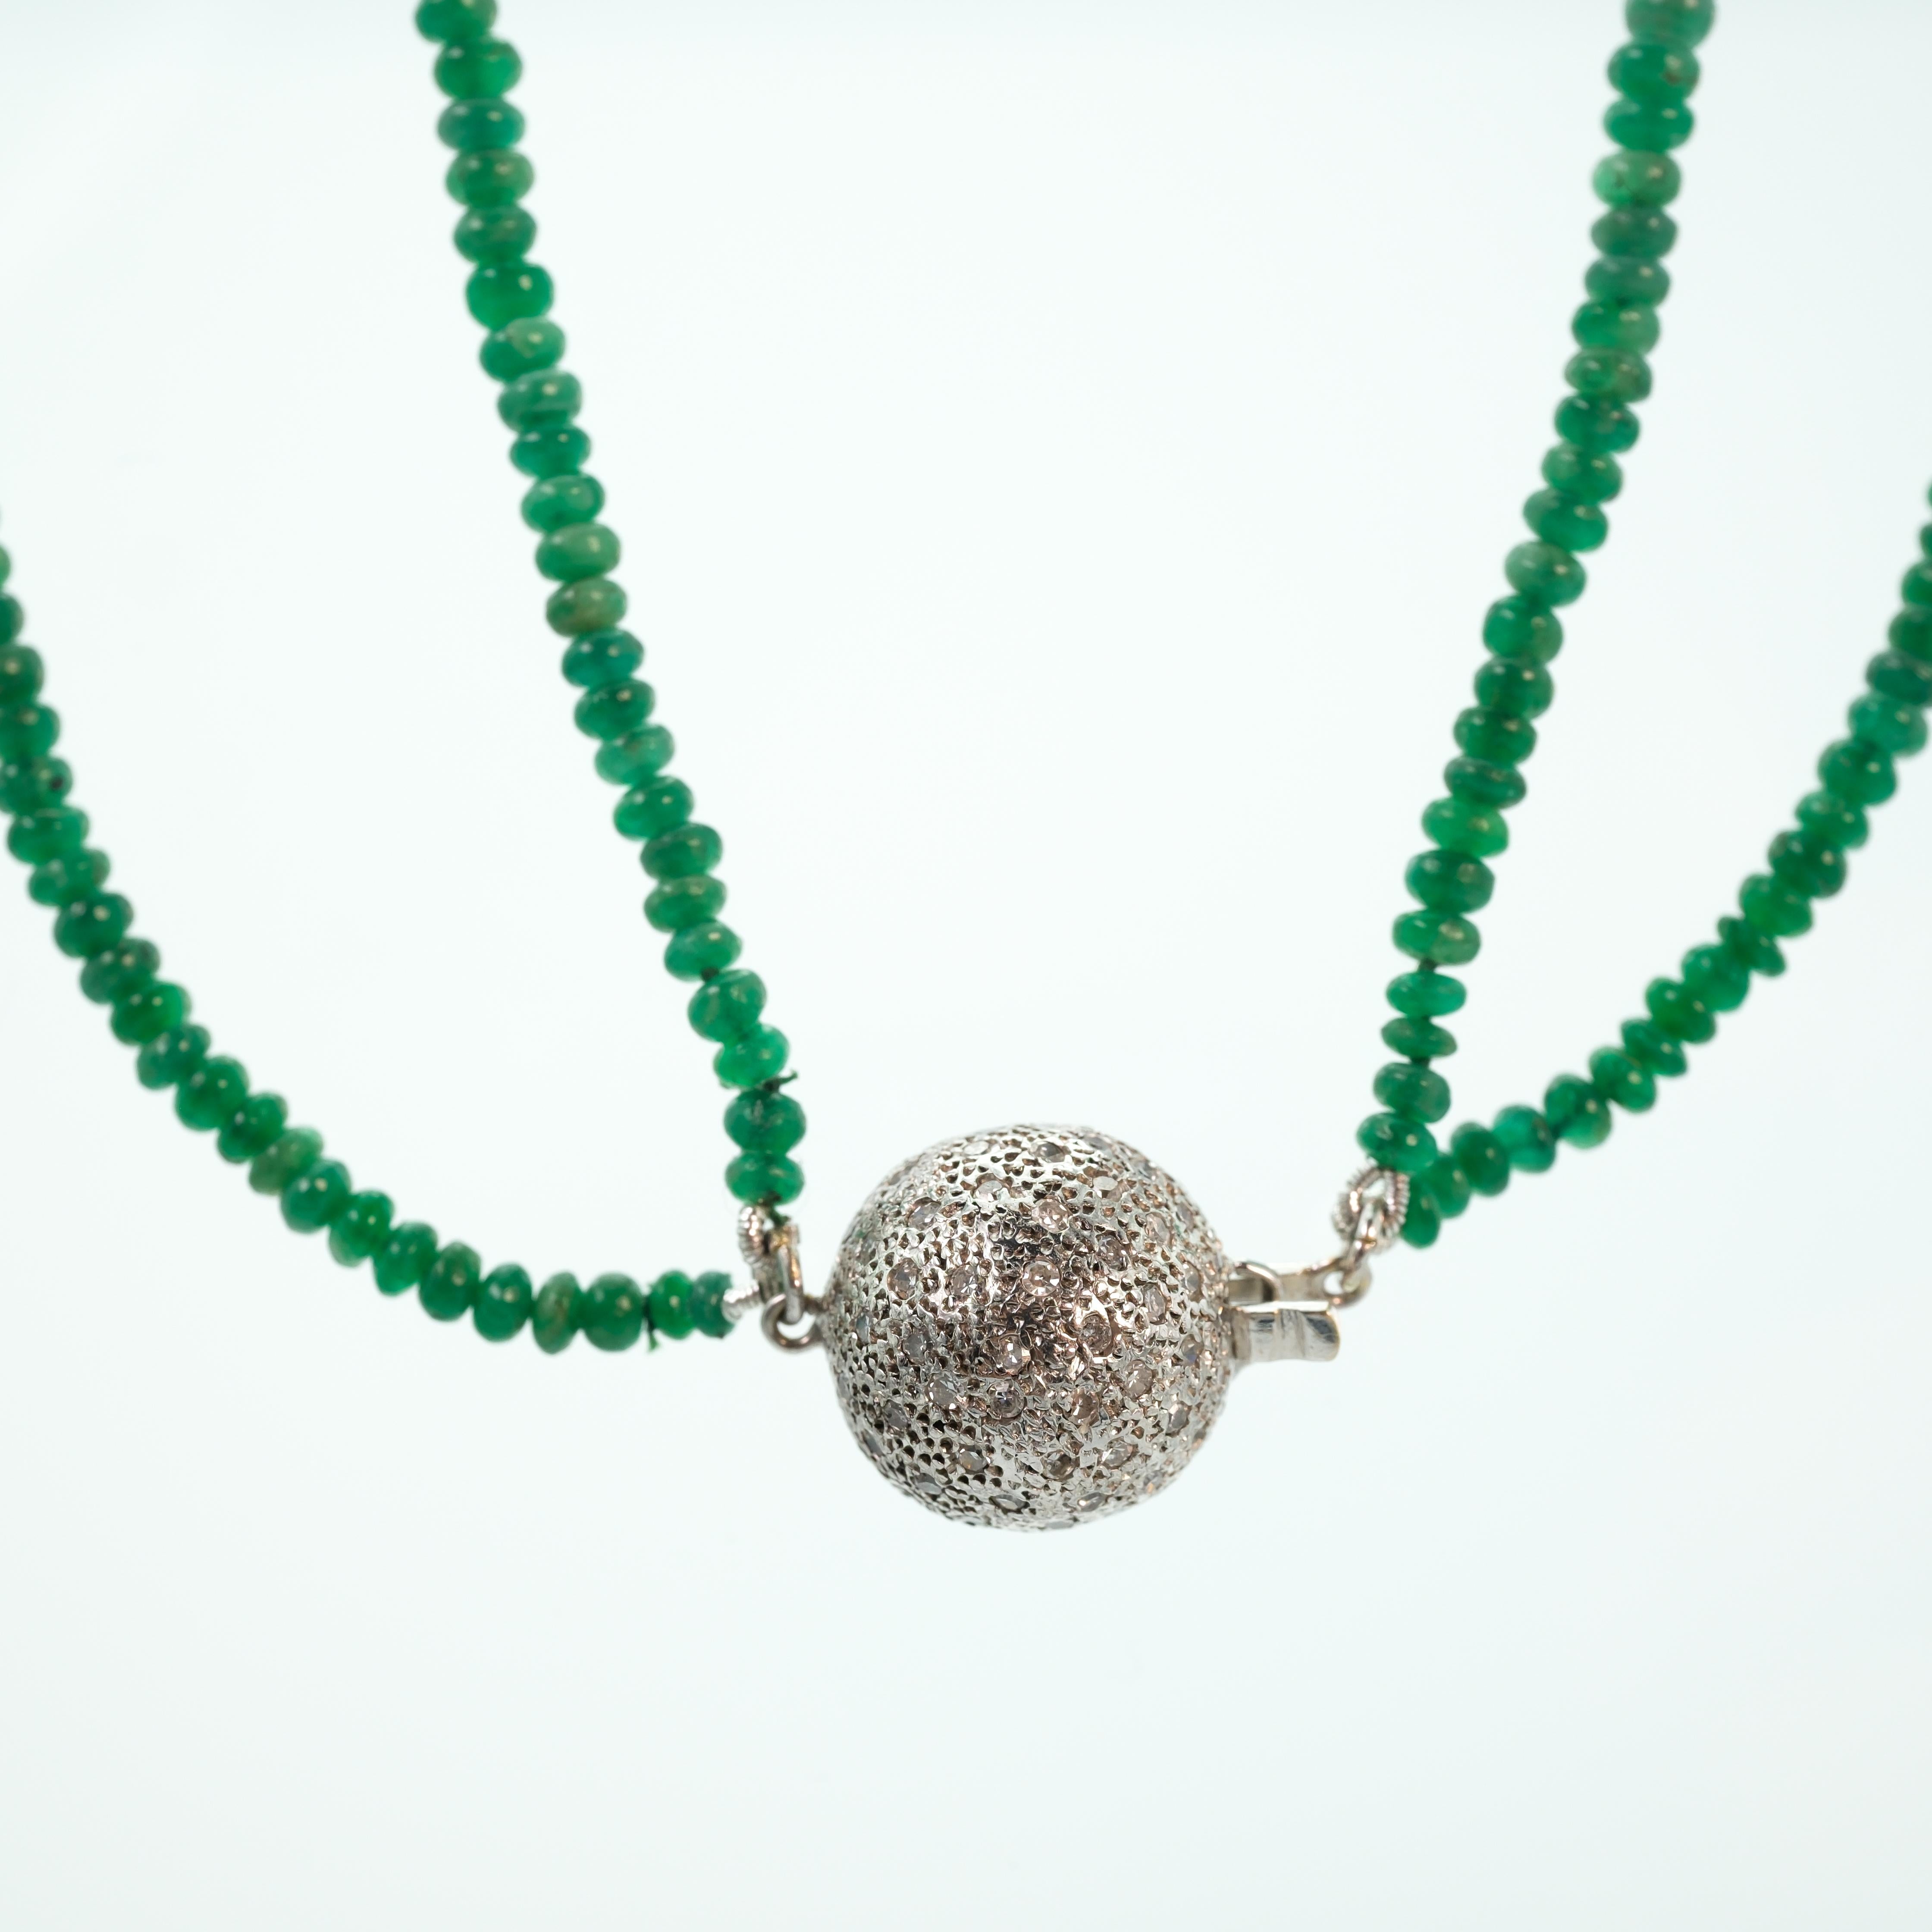 Modern Beaded 125 Carats Emerald Necklace with 14 Karat White Gold Diamond Pendant For Sale